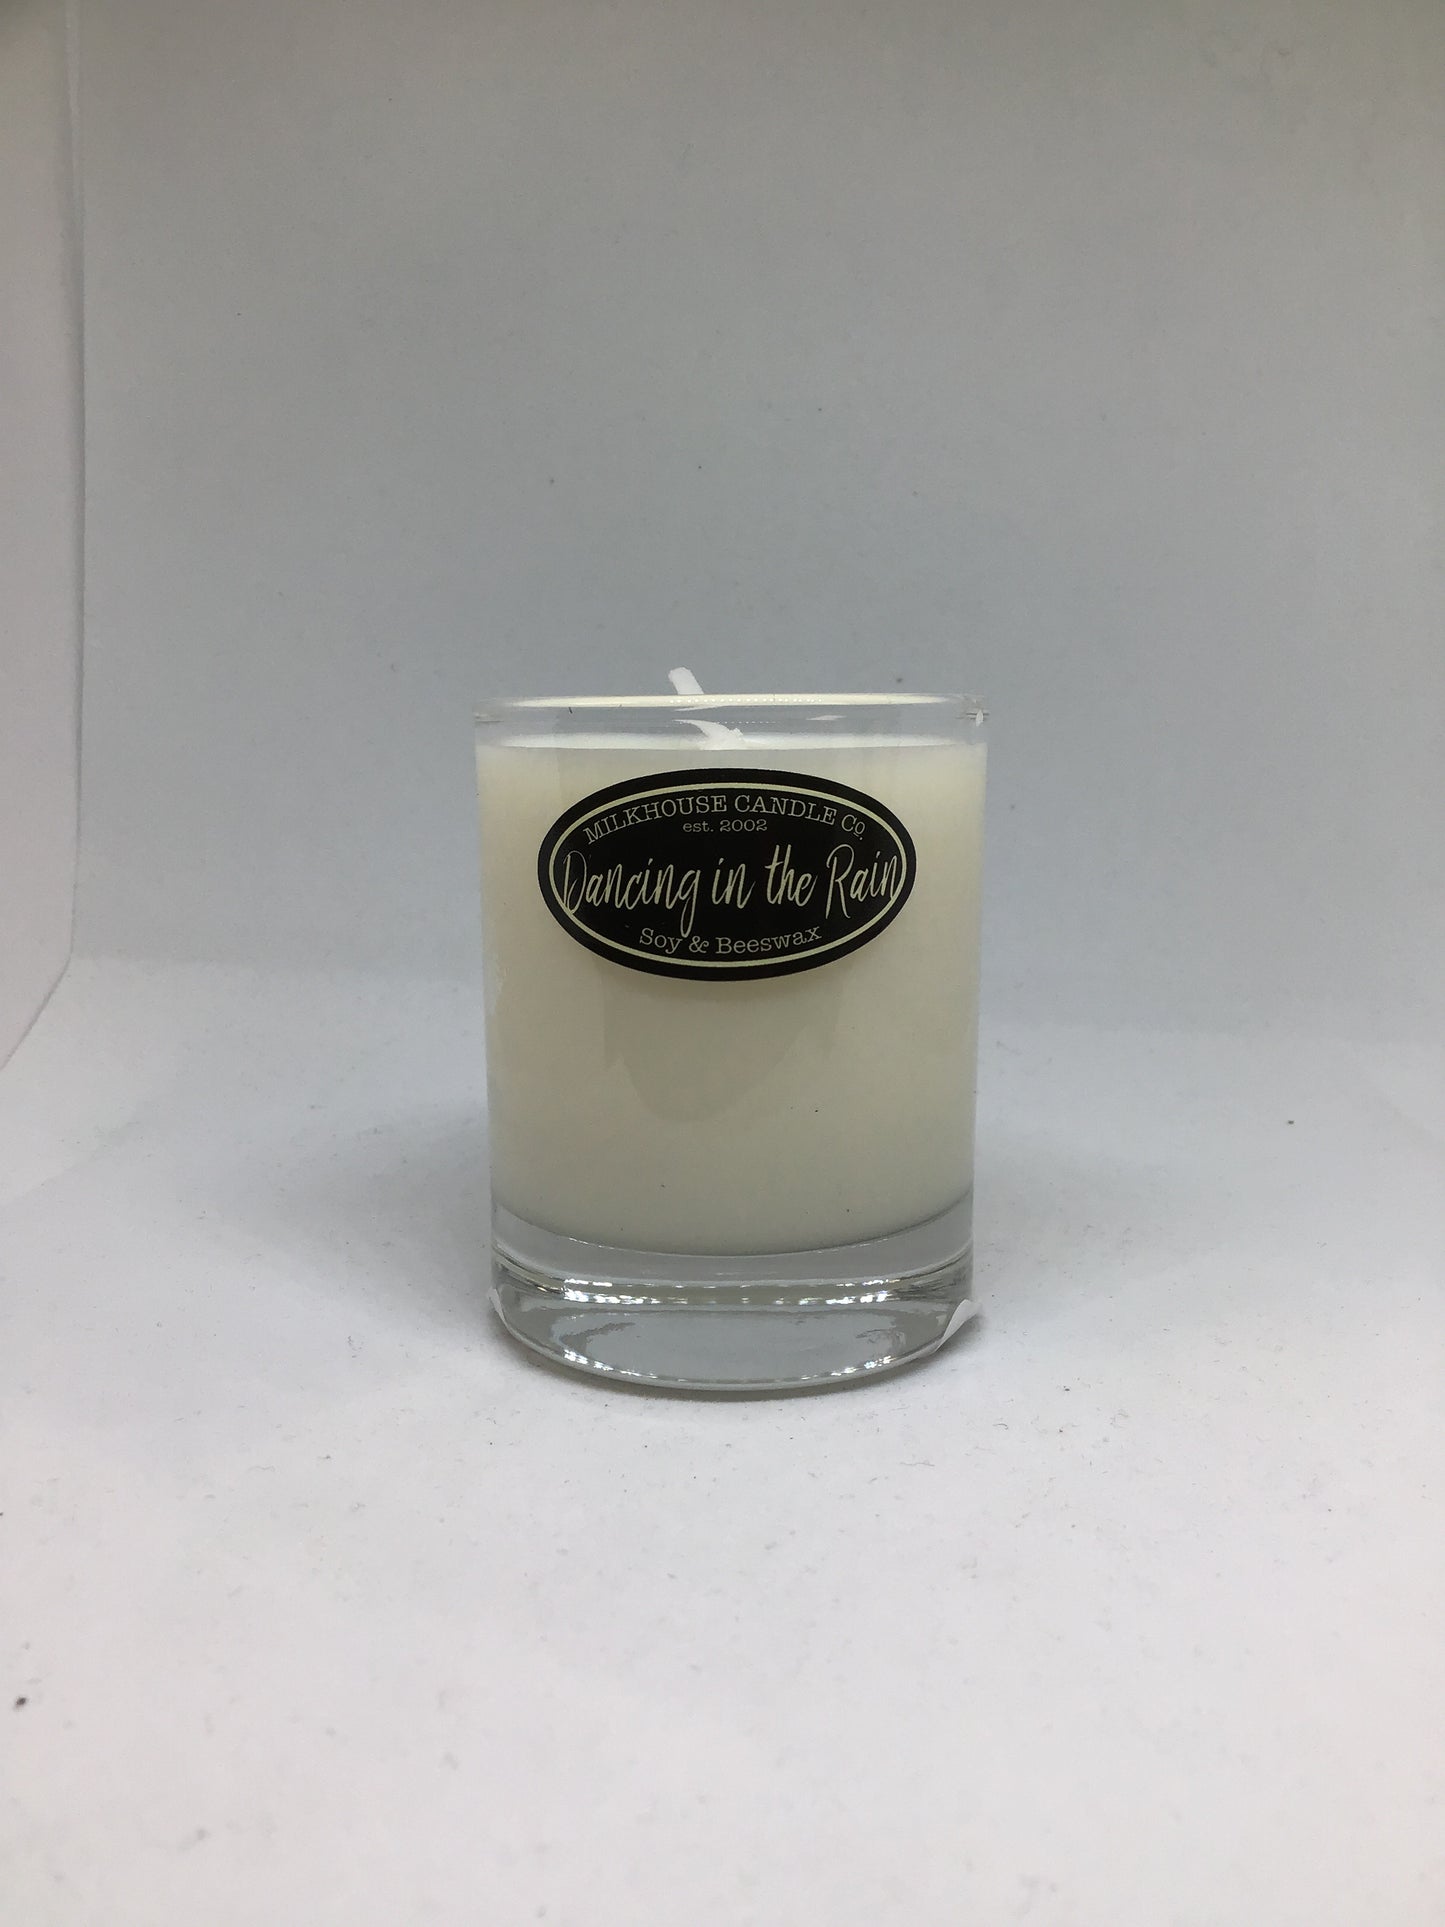 Butter Shot Milkhouse Candle